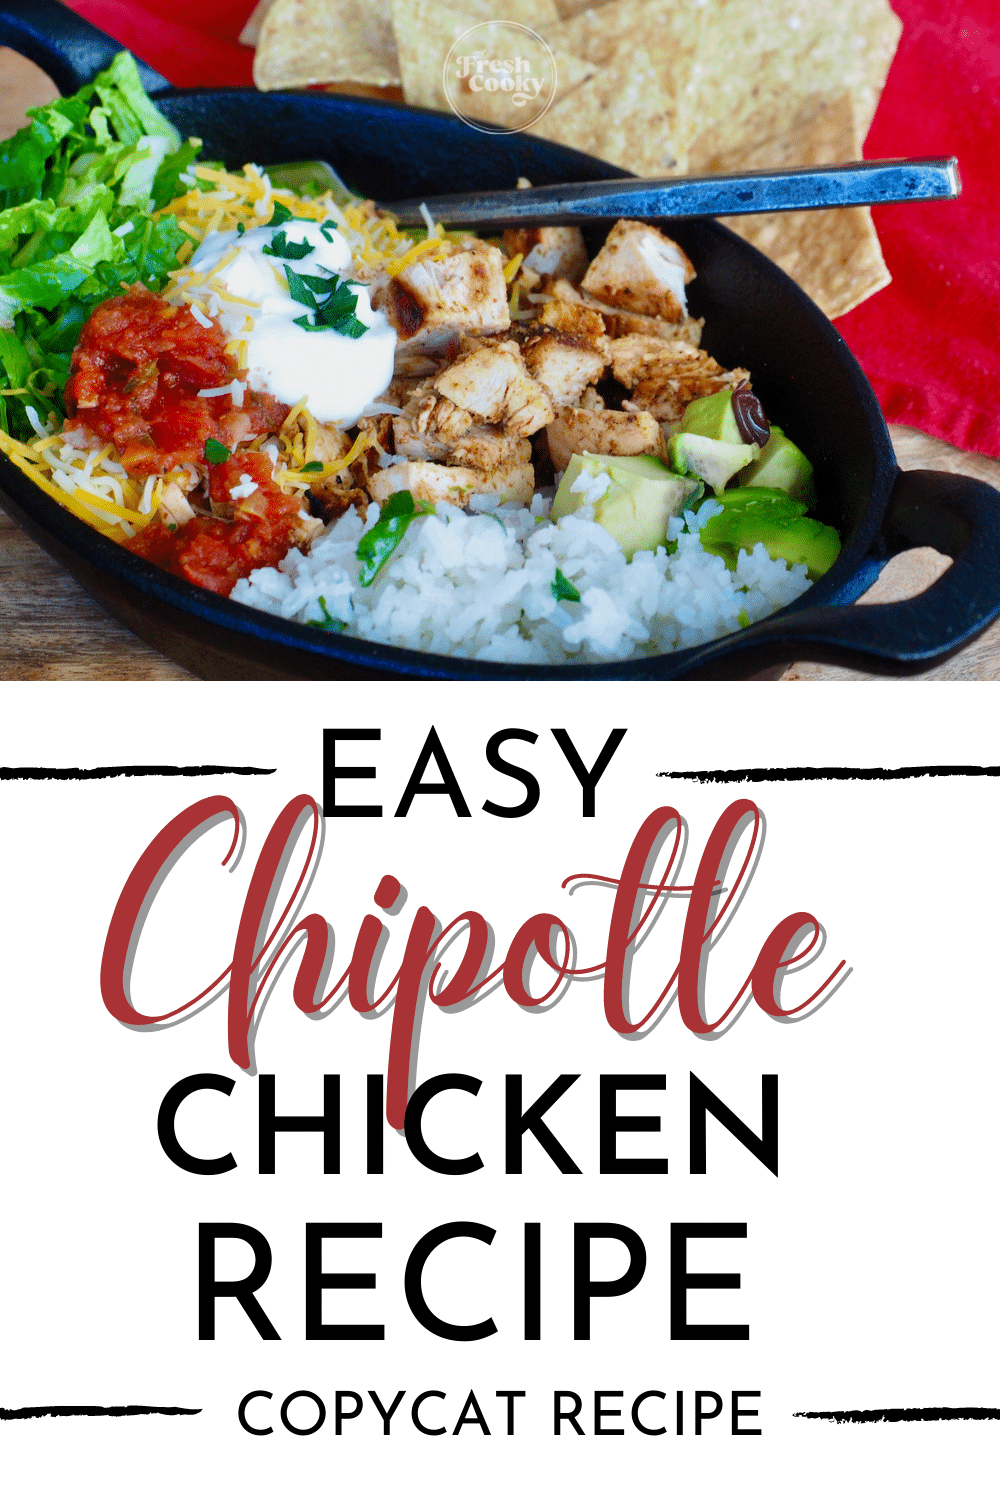 https://www.thefreshcooky.com/wp-content/uploads/2020/04/COPYCAT-chipotle-chicken-recipe-pin.png